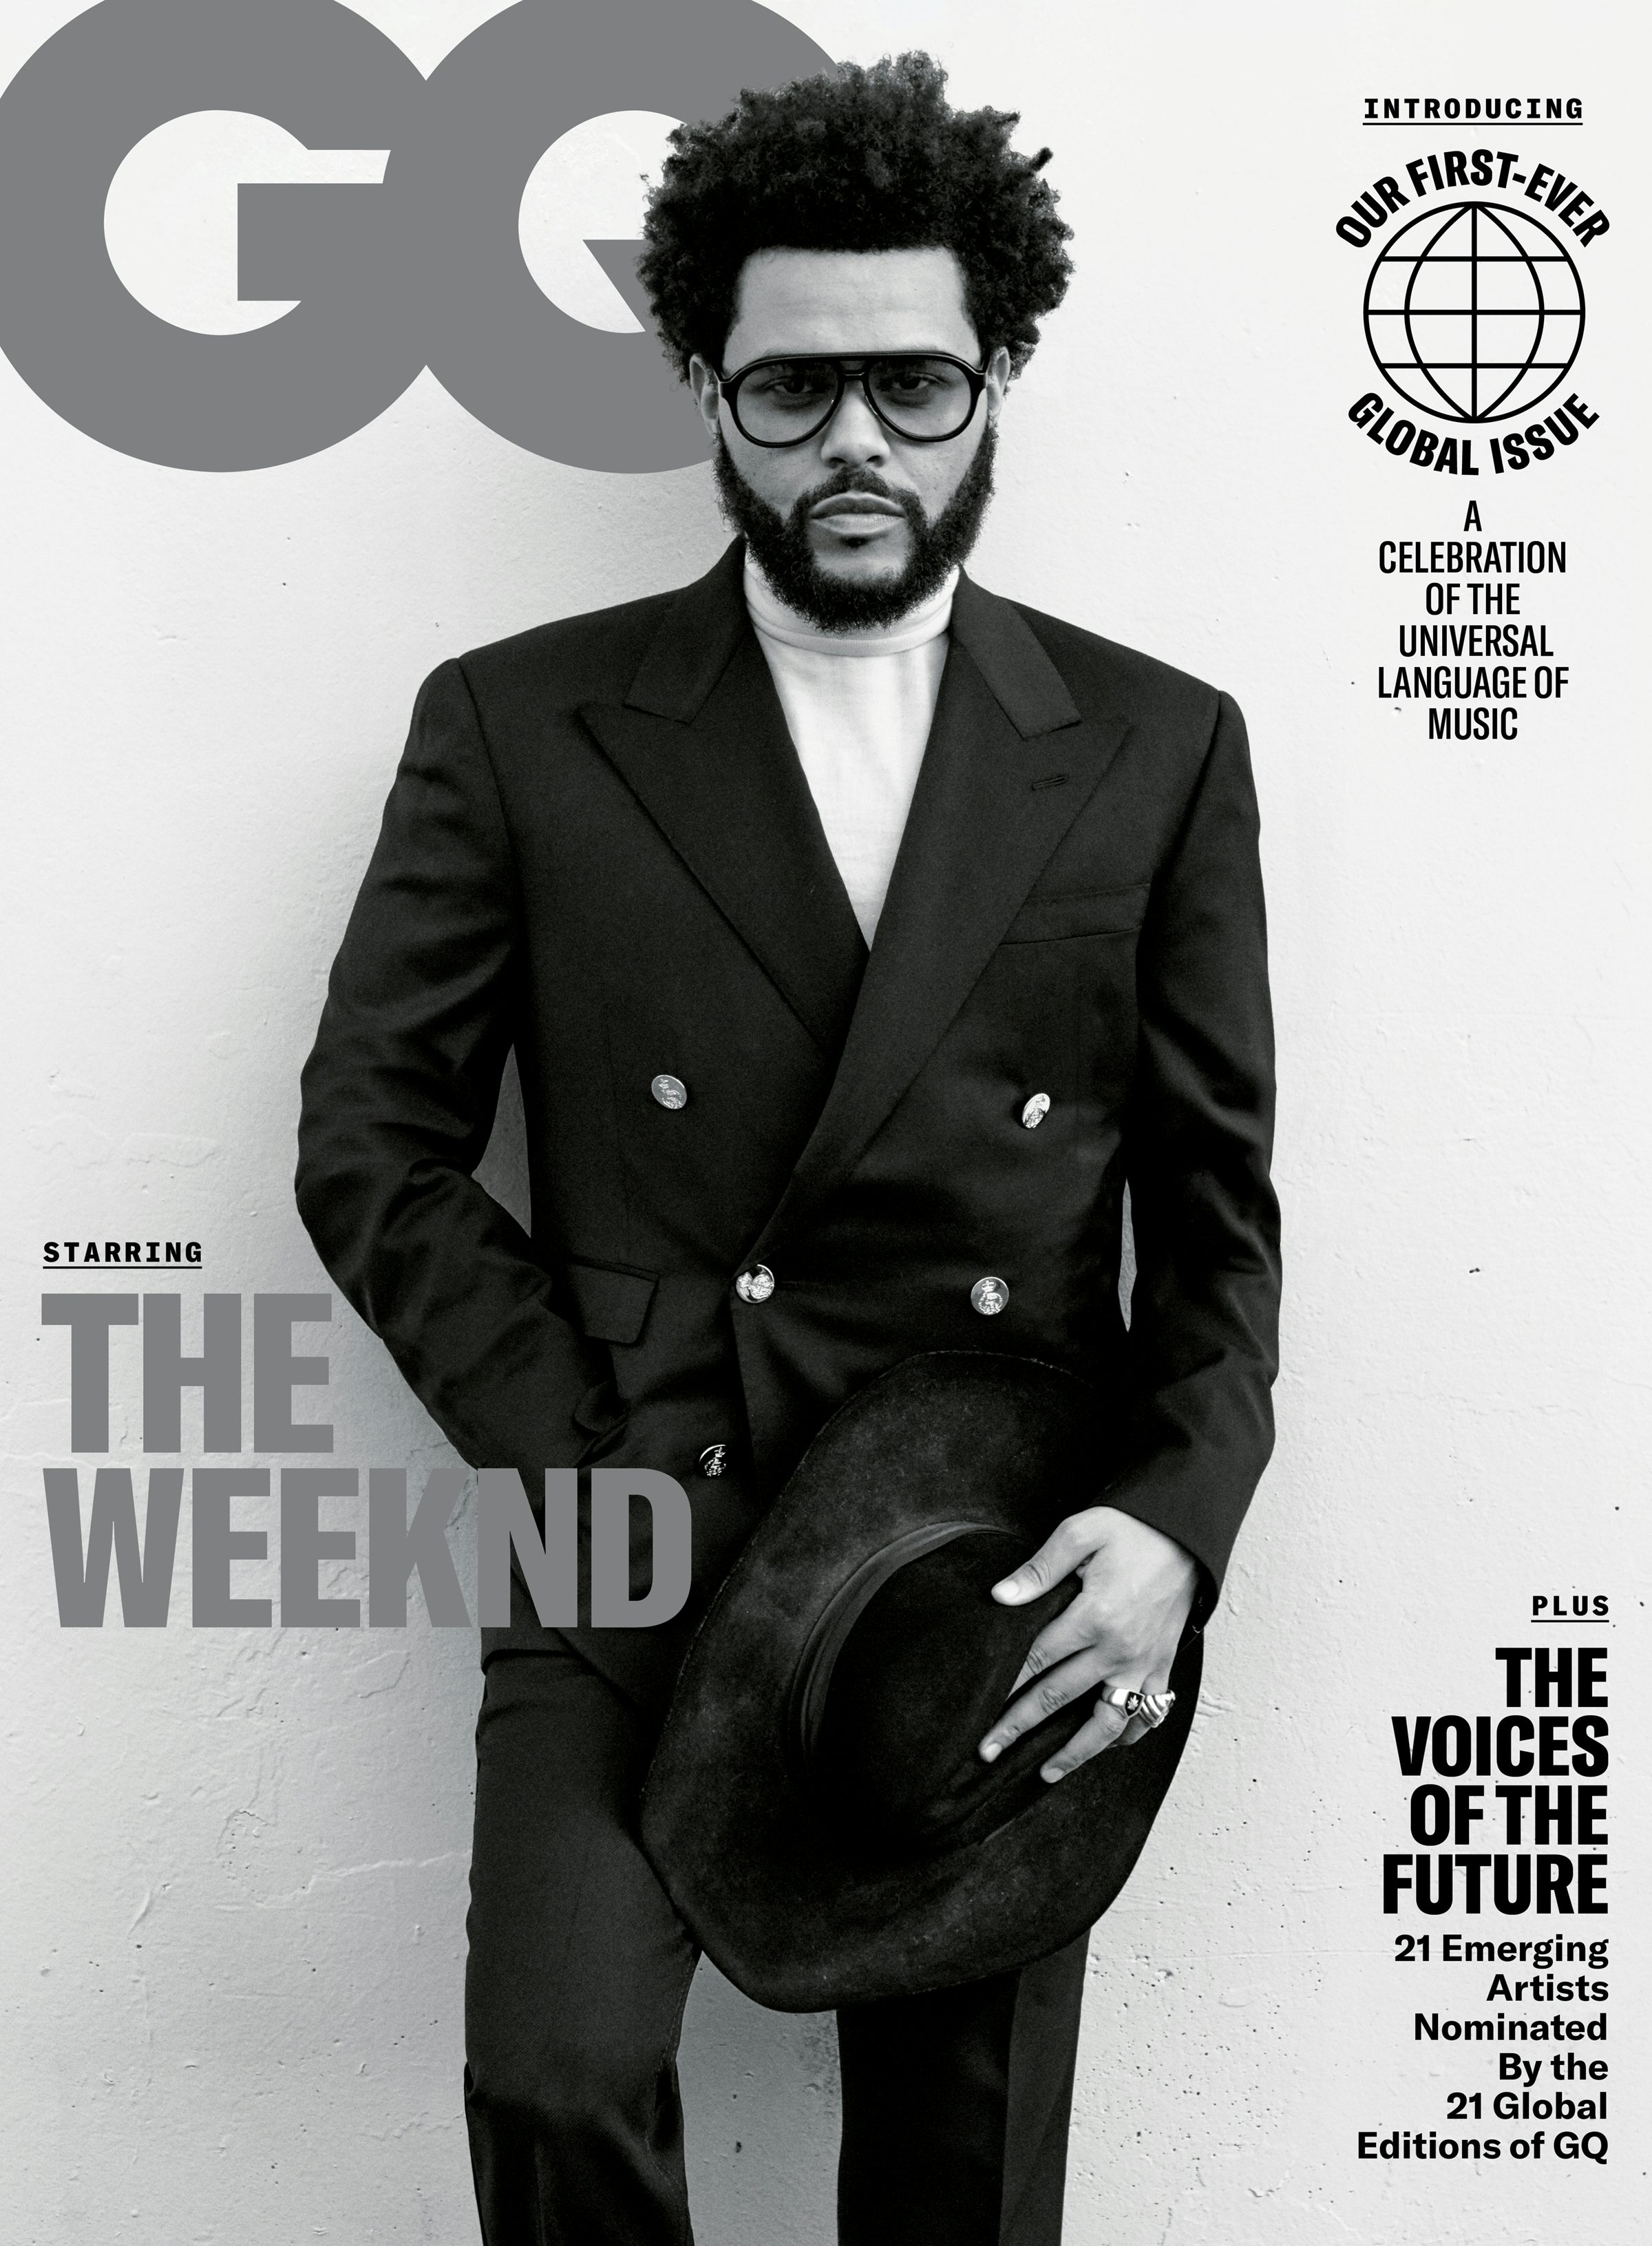 The Weeknd covers GQ, photographed by Daniel Jackson. GQ